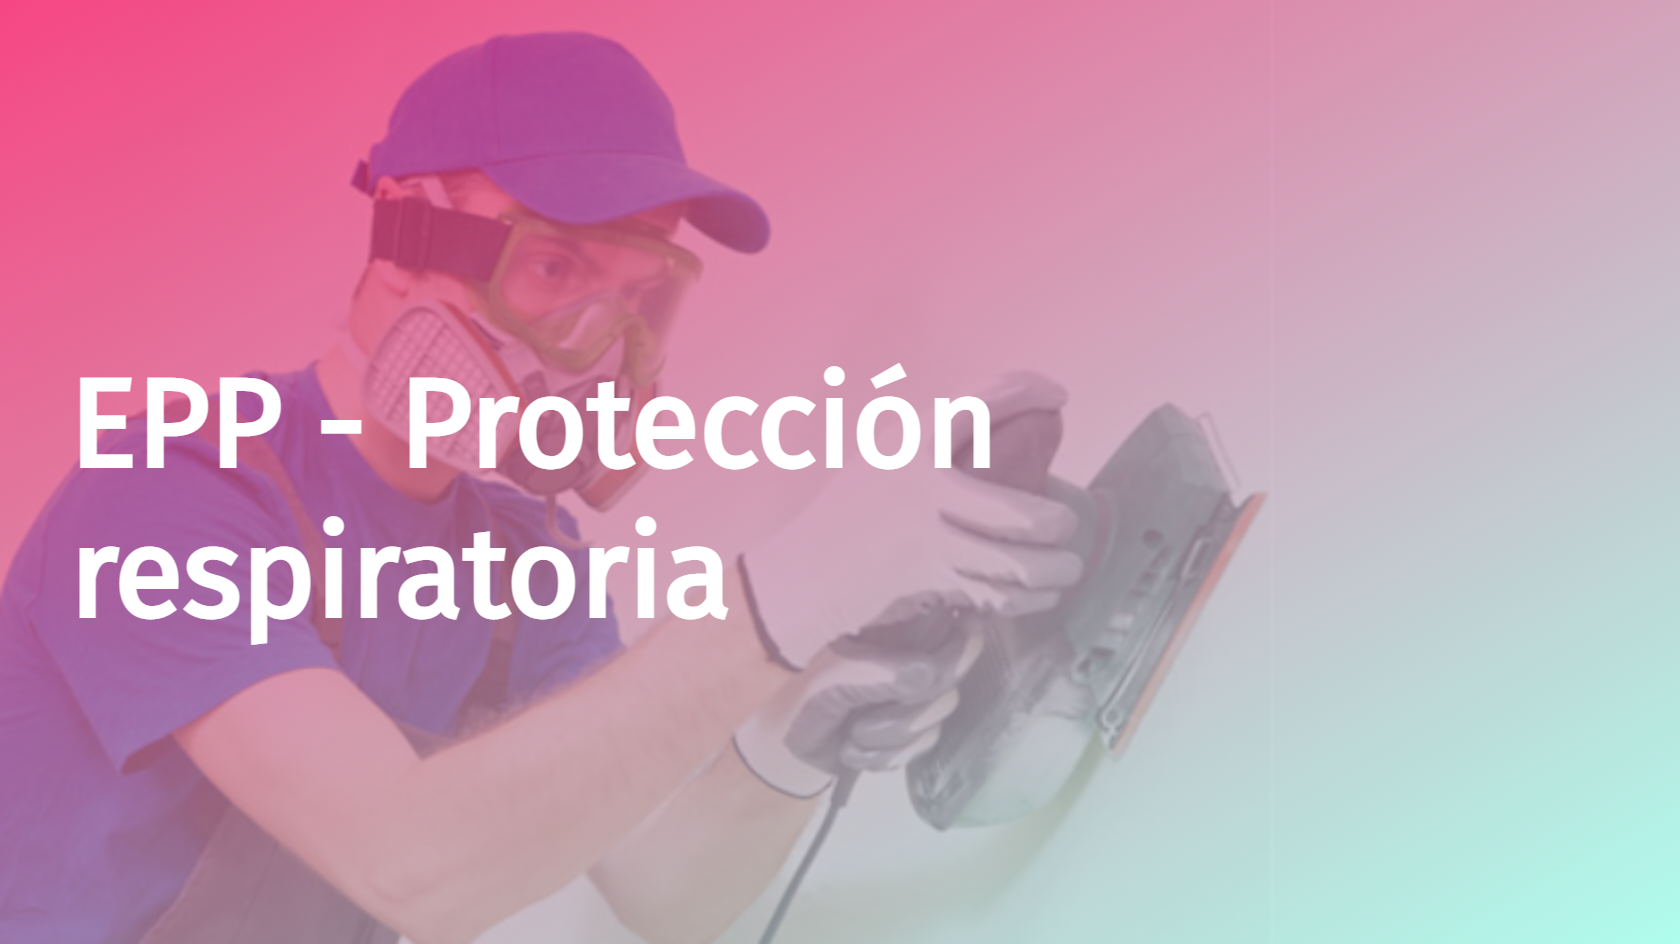 Spanish - PPE - Respiratory Protection